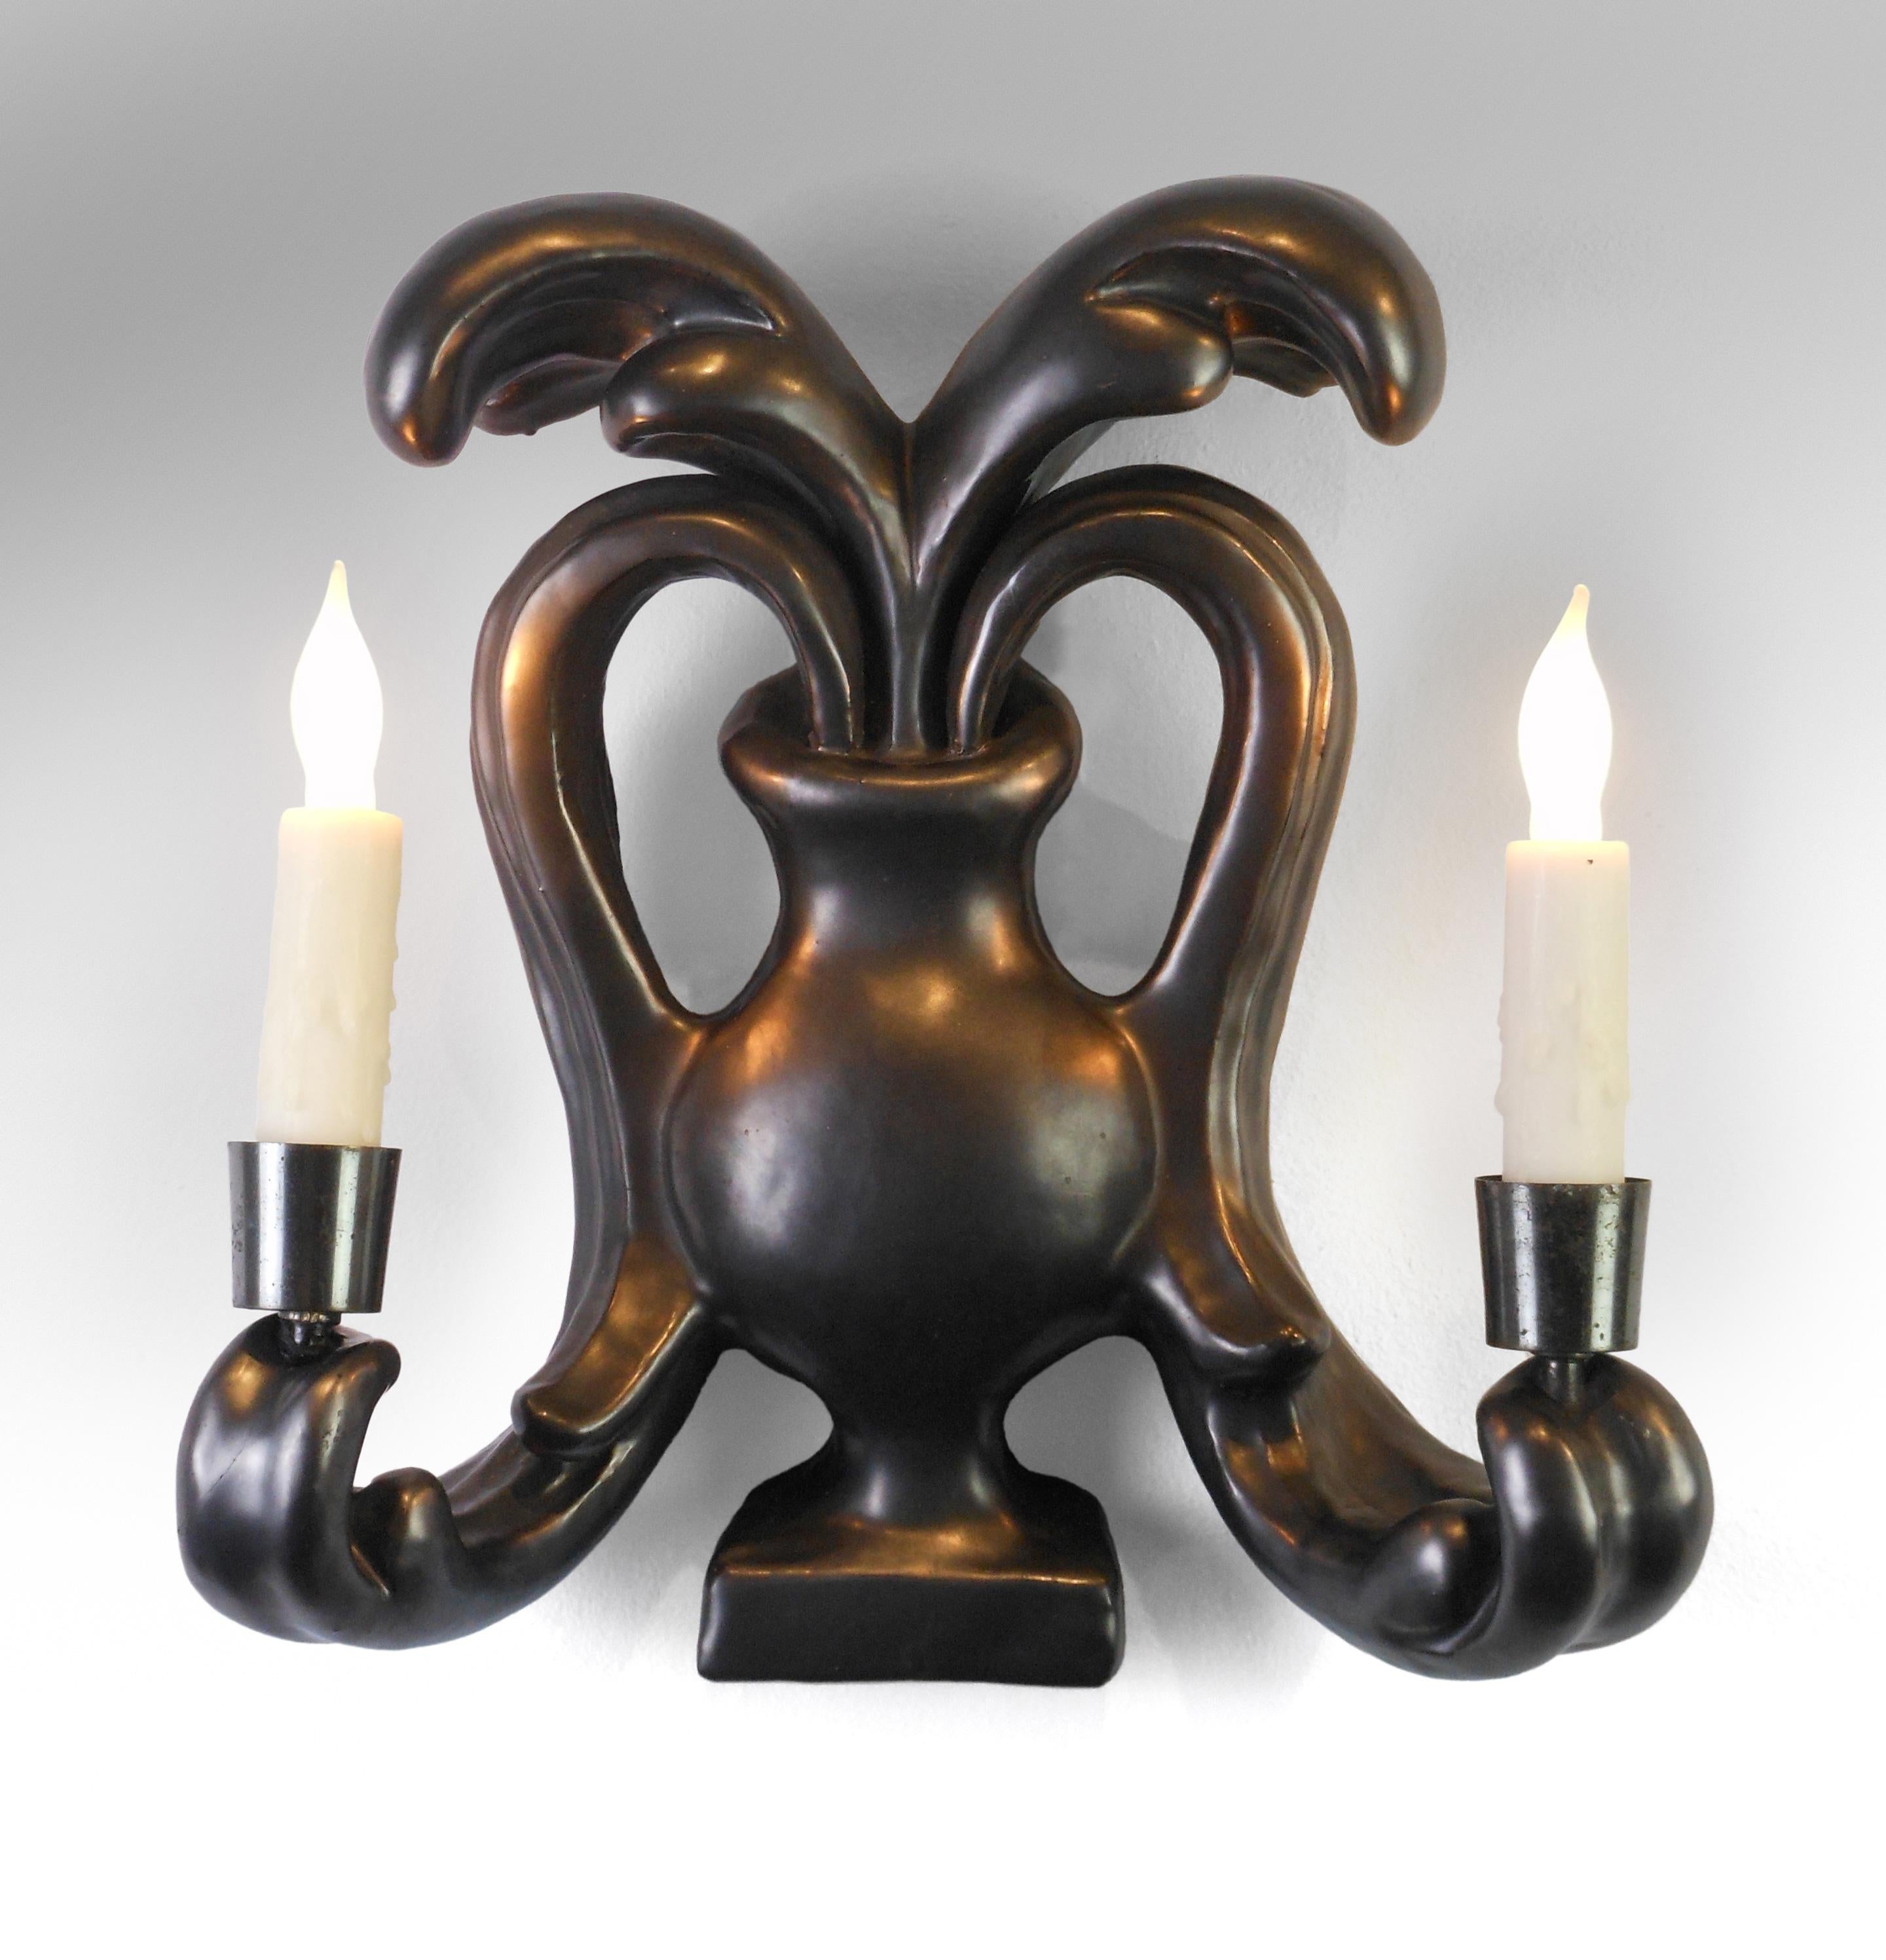 Georges Jouve, pair of French matt black glazed ceramic sconces
Mid-20th century
Classic Jouve, inventive, playful and disciplined. Each in the form of a baluster urn issuing scrolling acanthus leaf candle arms.
Georges Jouve (1910-1964) was one